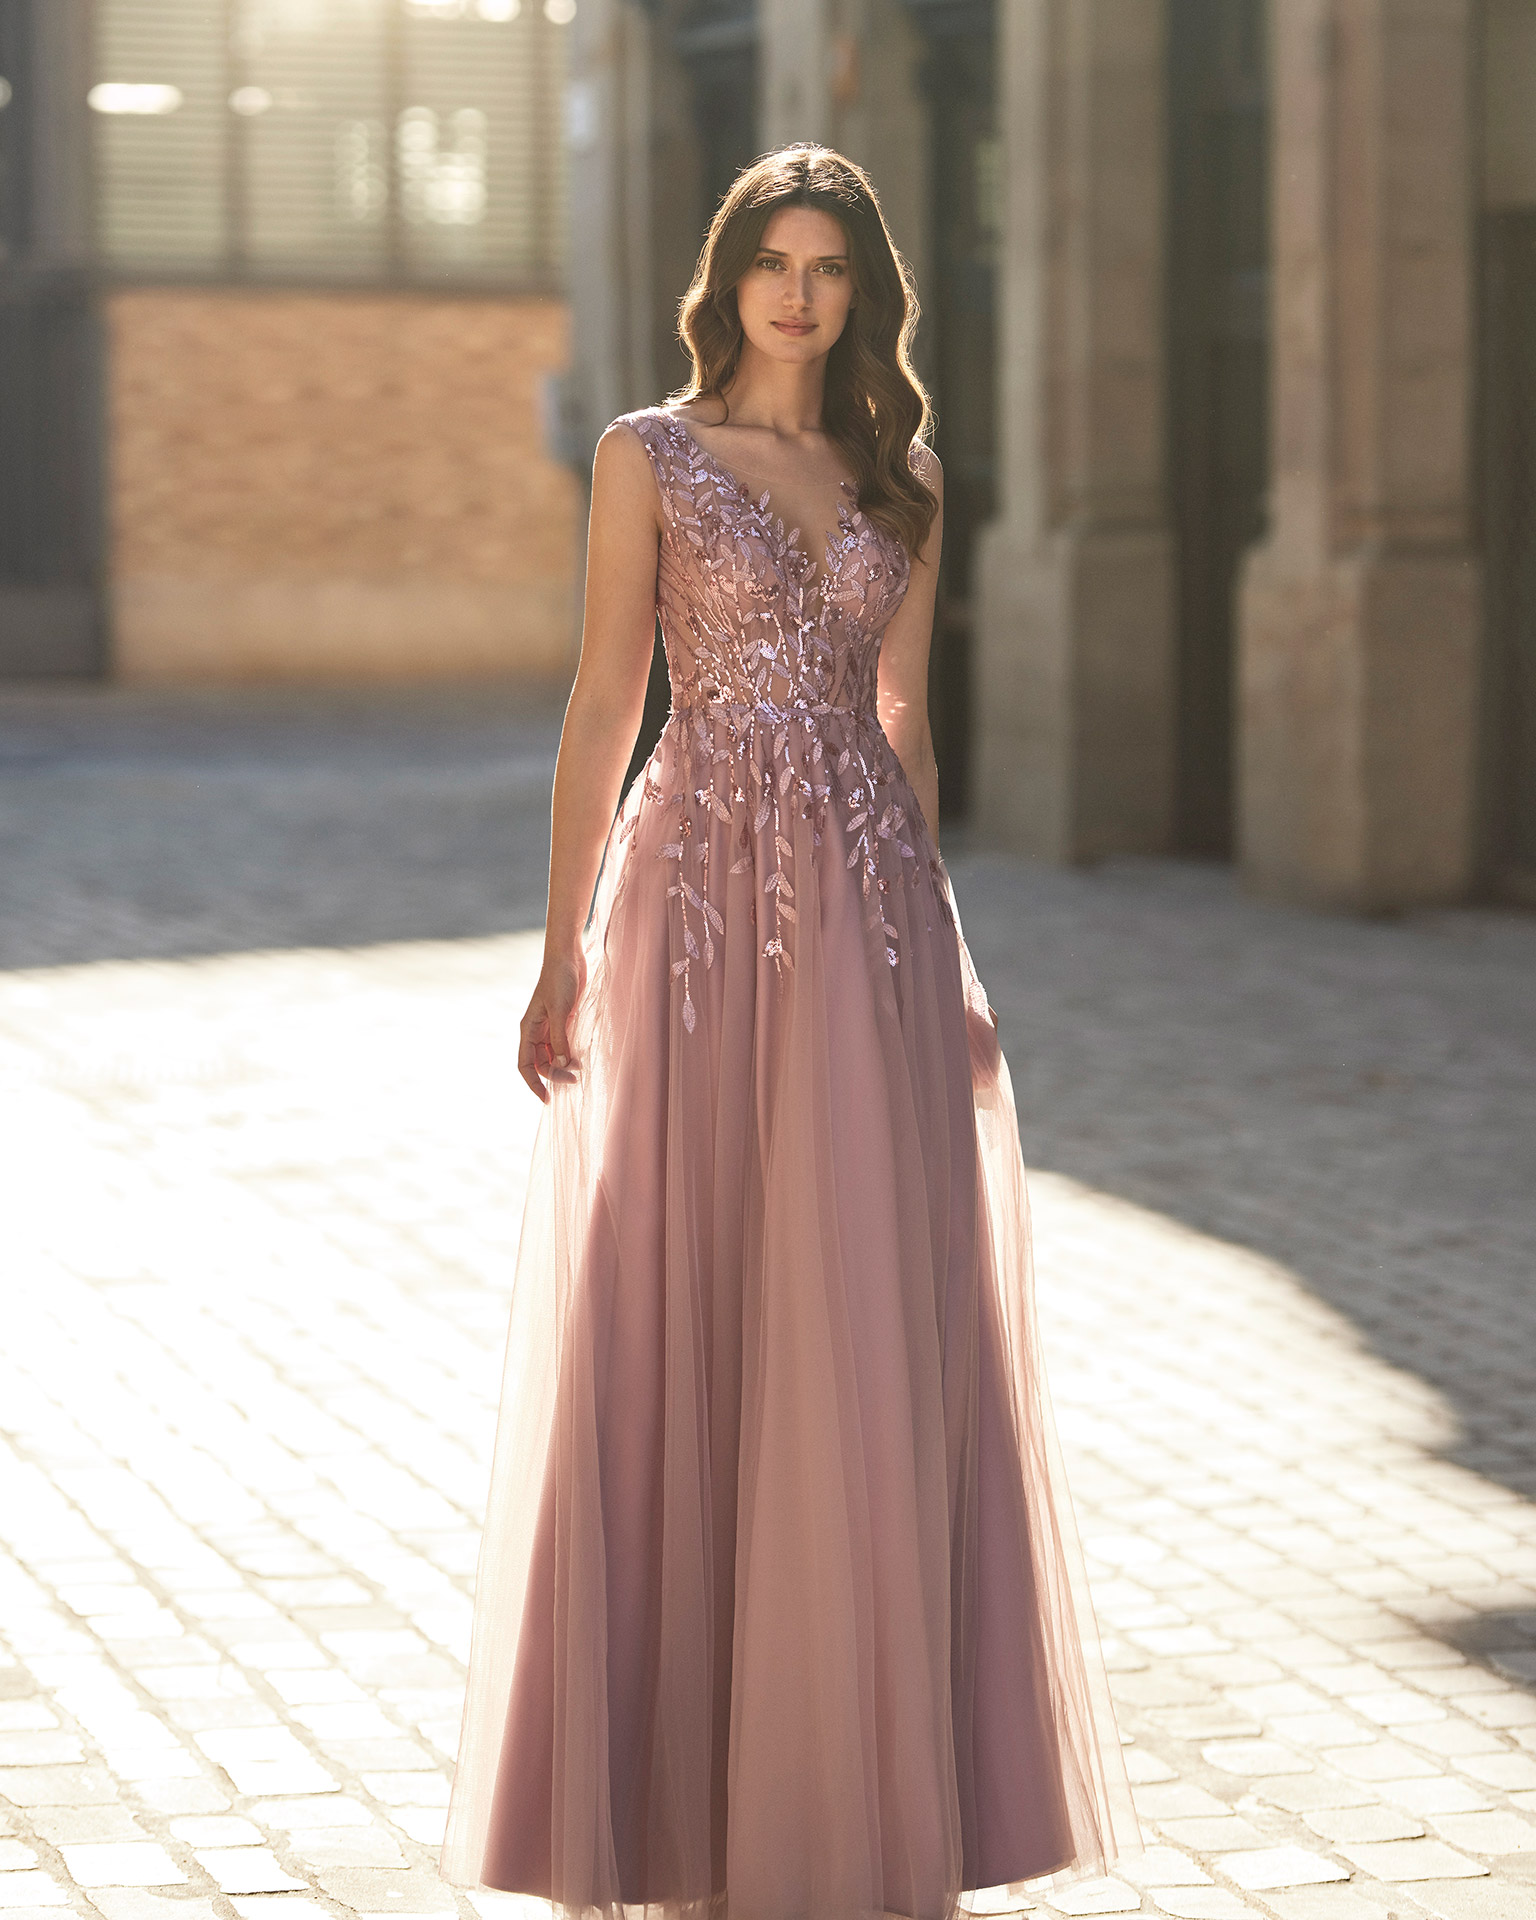 Long princess-style evening dress, made of tulle. Marfil Barcelona design with a beaded lace bodice, a V-neckline, and an open back. MARFIL_BARCELONA.